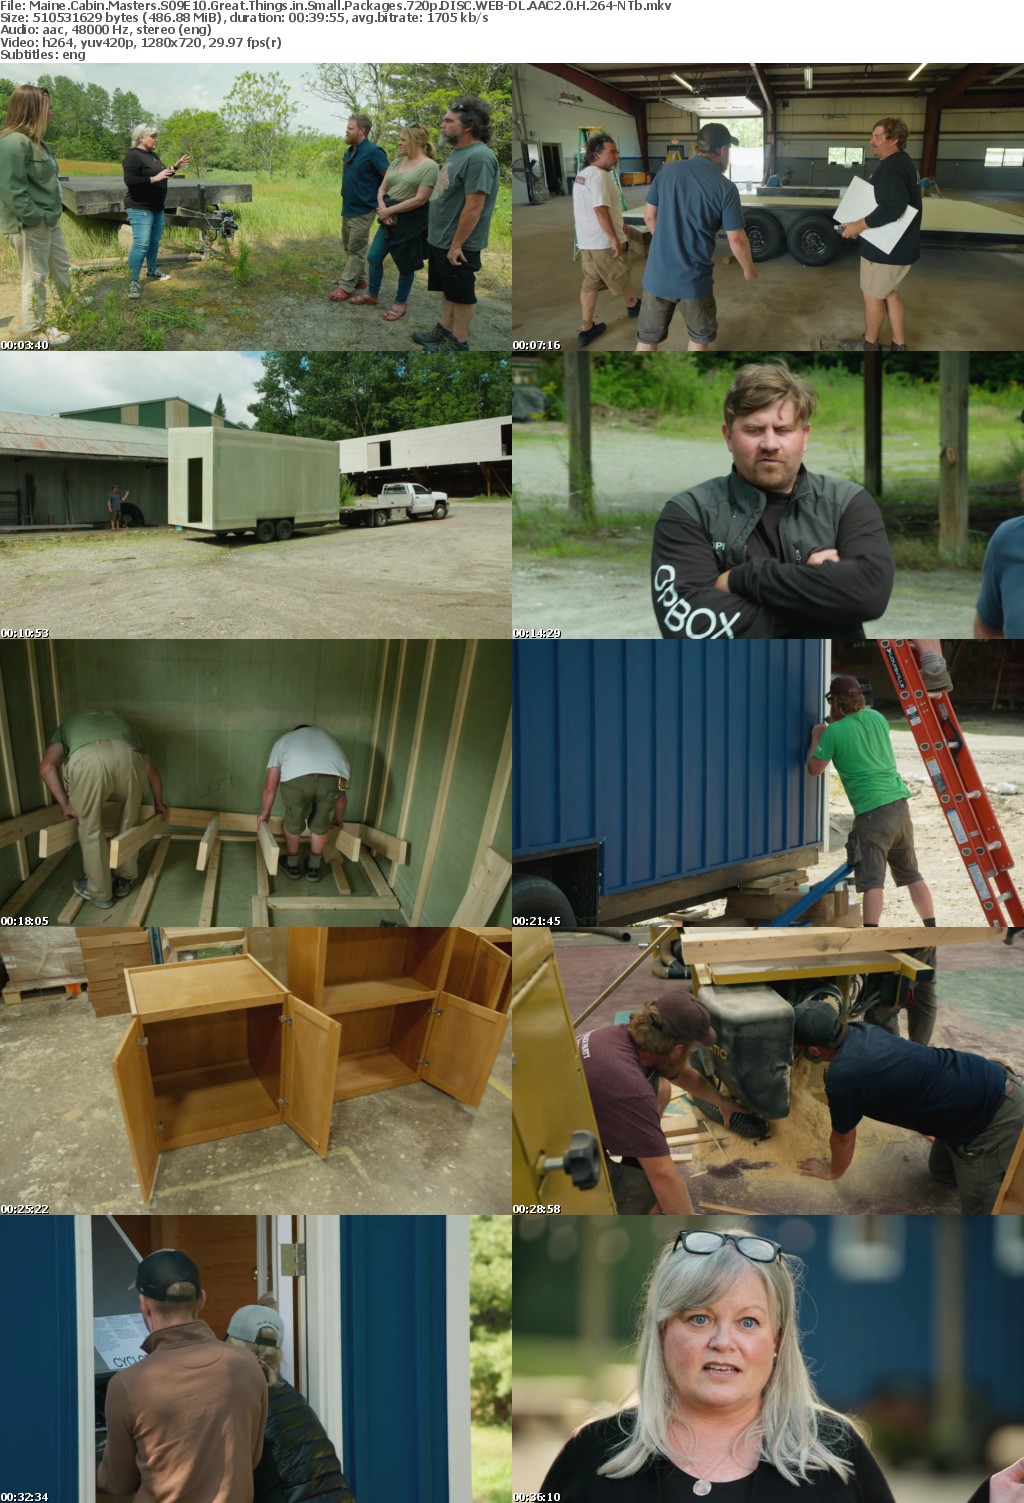 Maine Cabin Masters S09E10 Great Things in Small Packages 720p DISC WEB-DL AAC2 0 H 264-NTb